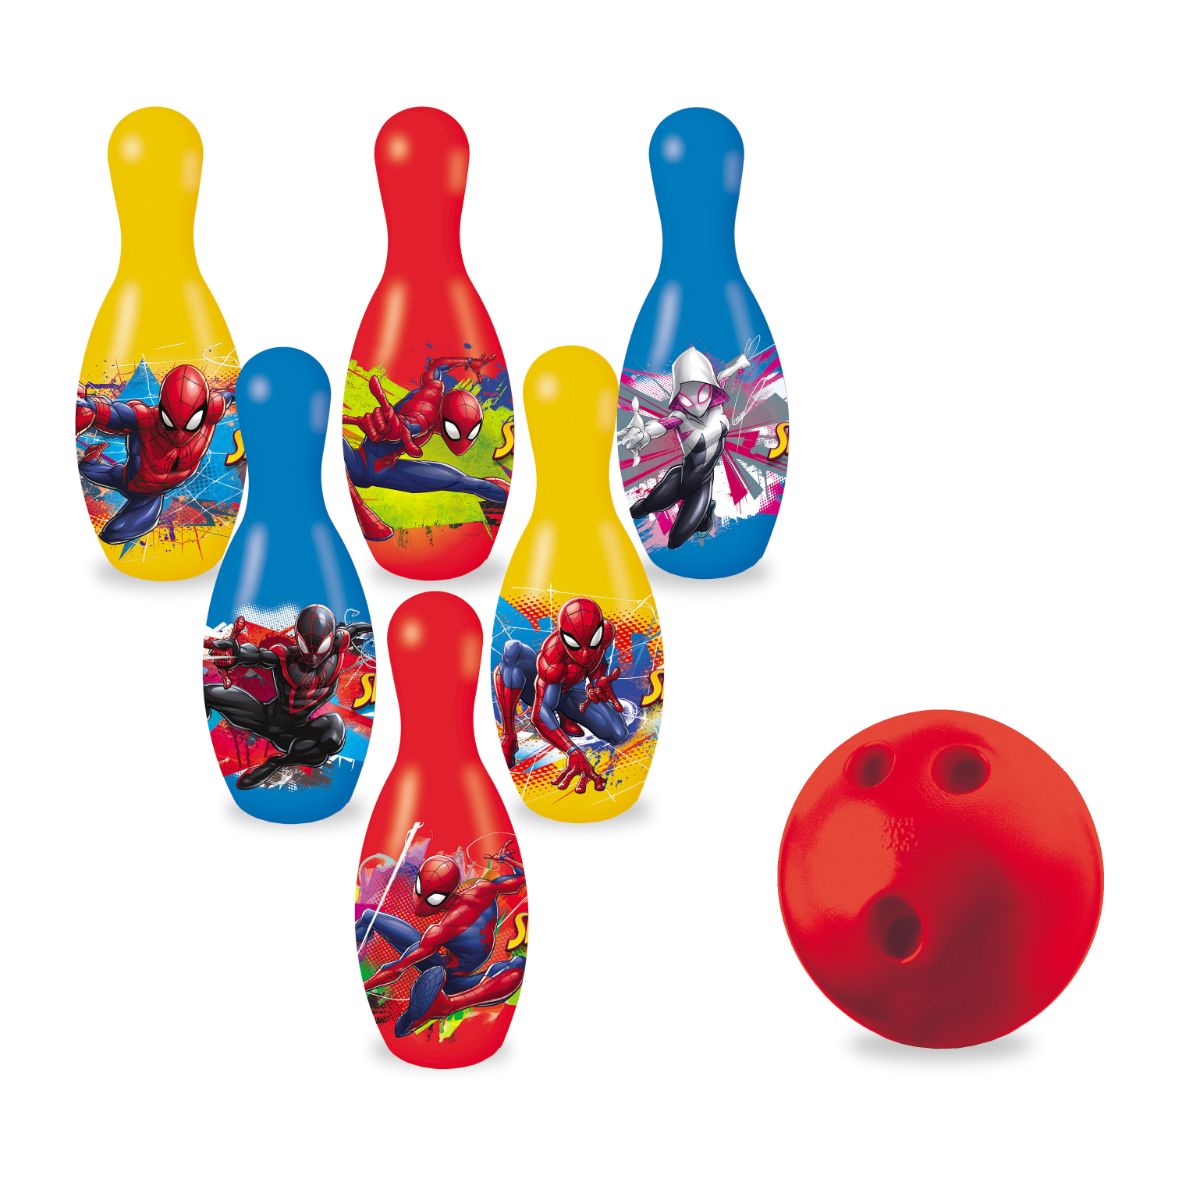 Jucarii exterior - Set Bowling  SPIDER-MAN, hectarul.ro